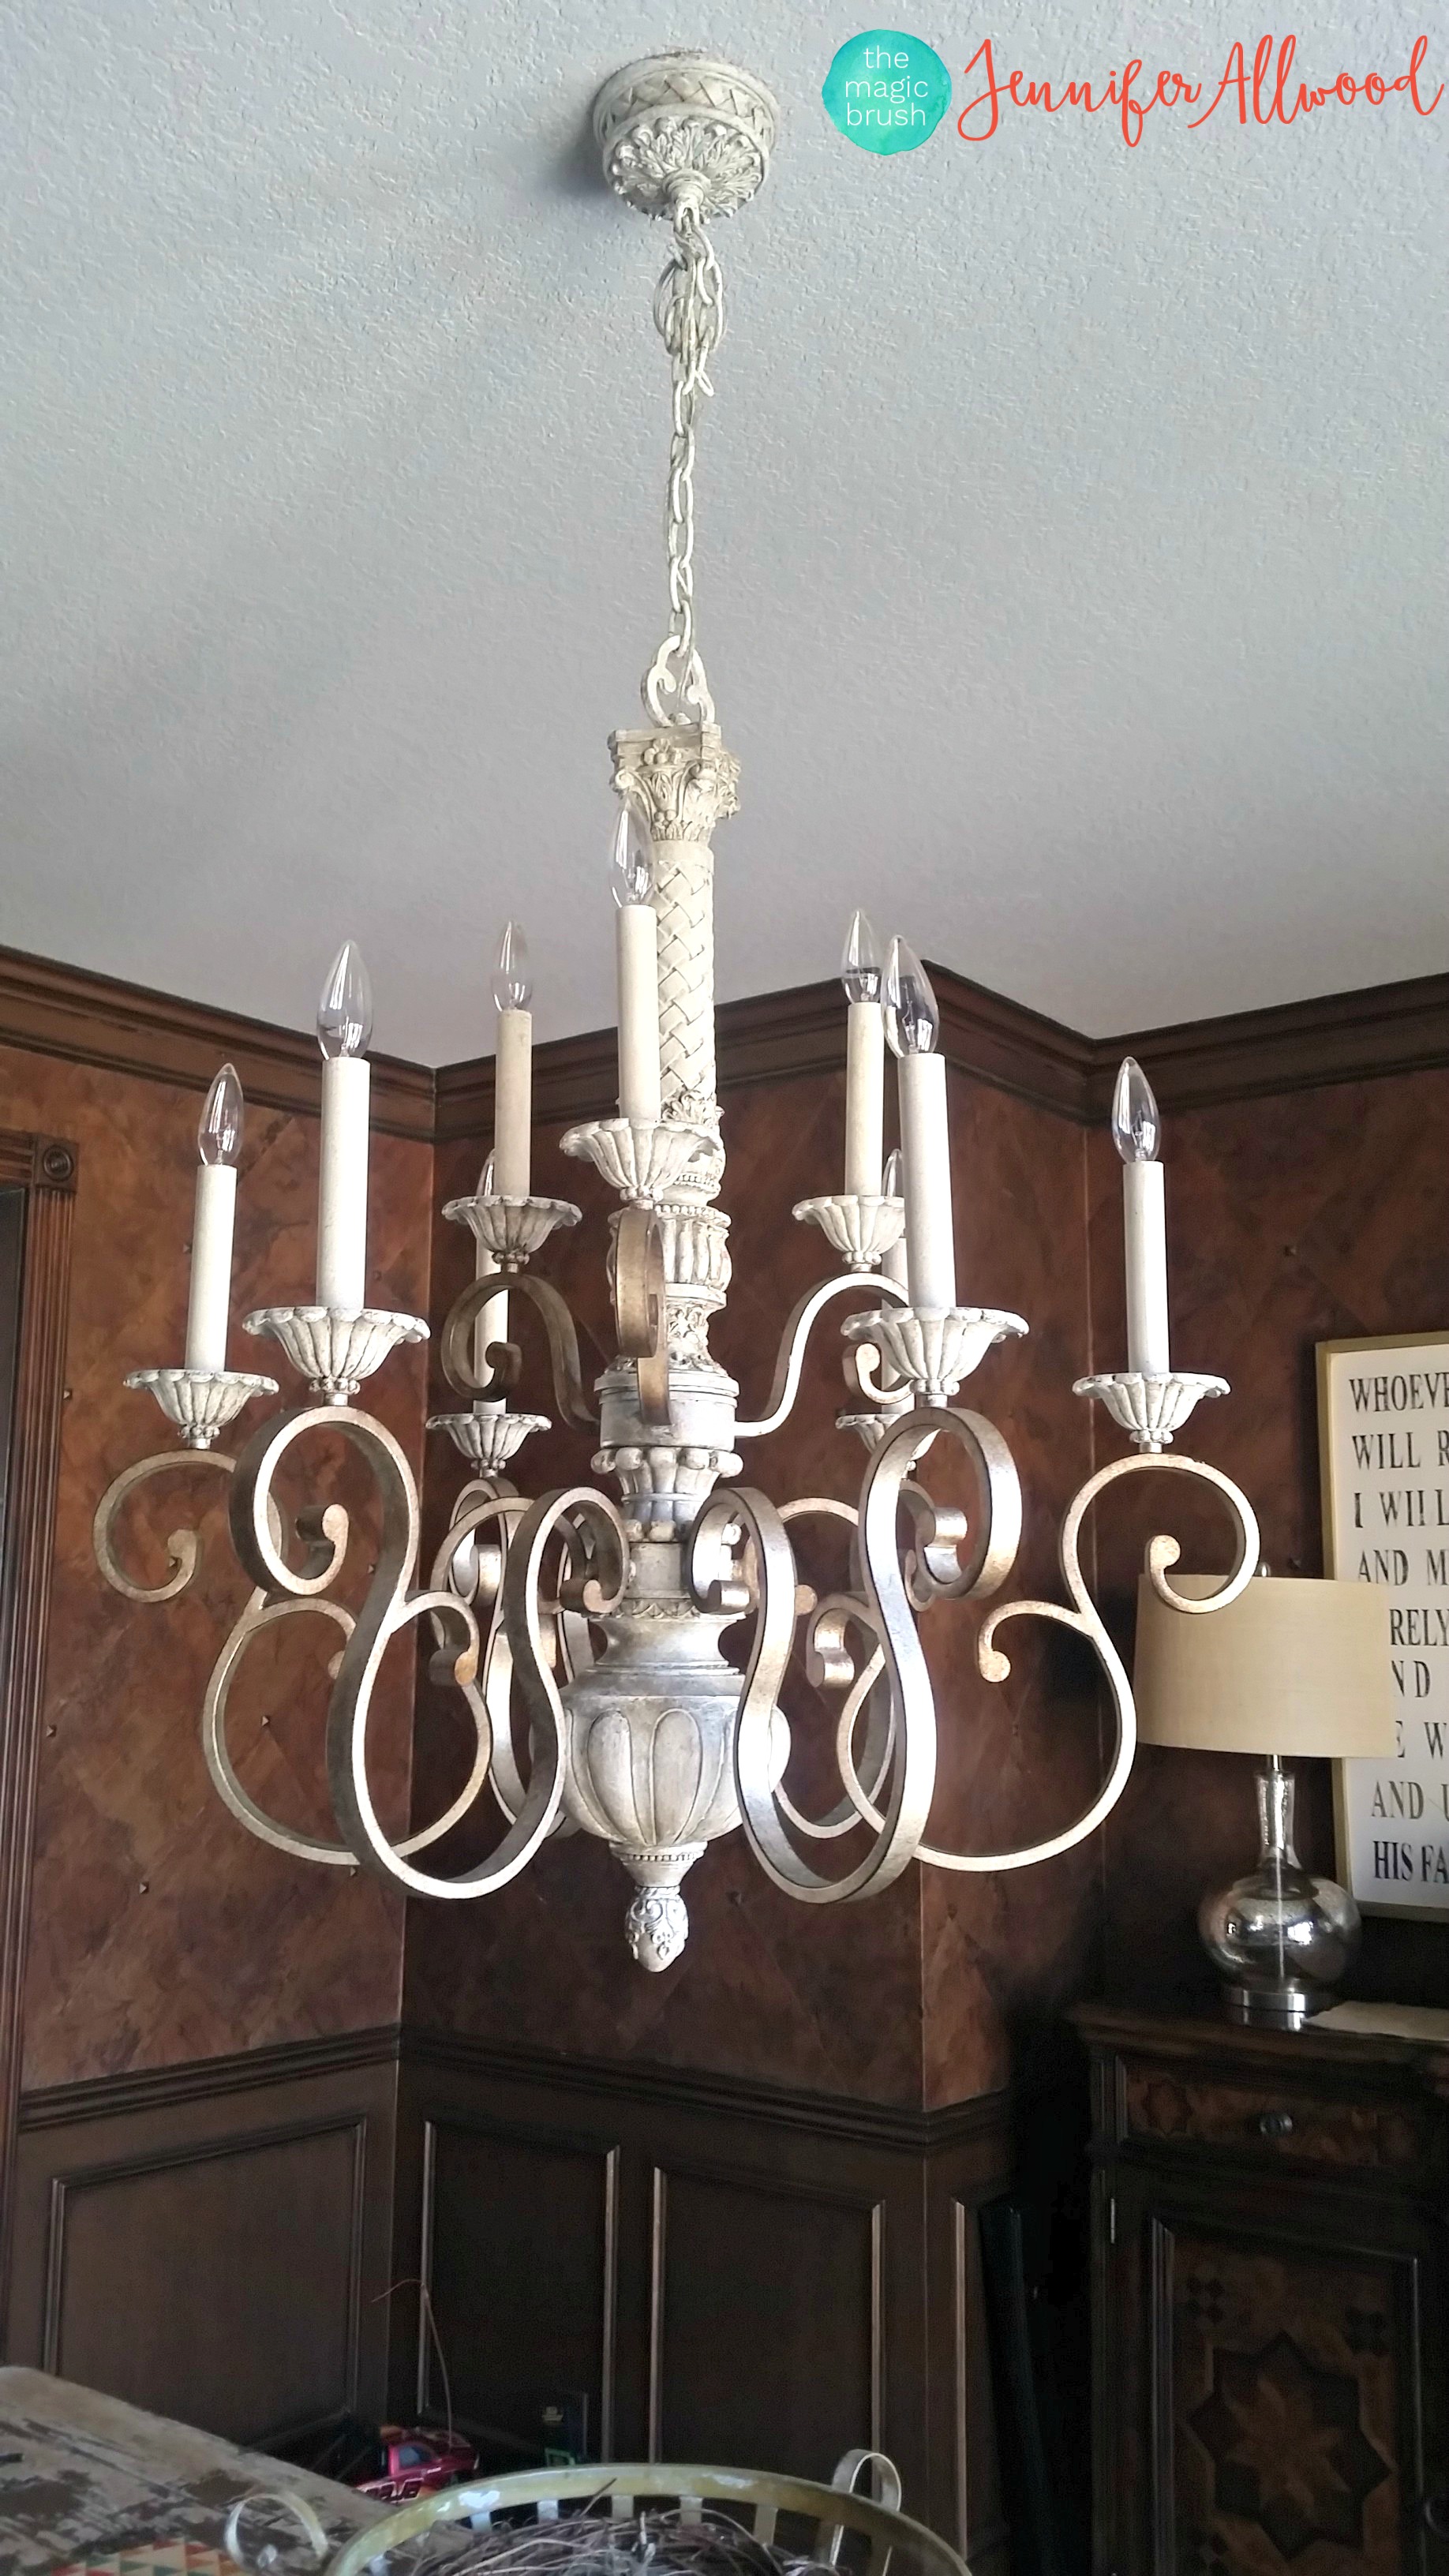 Painting Light Fixtures And Chandeliers, What Kind Of Paint To Use On Chandelier